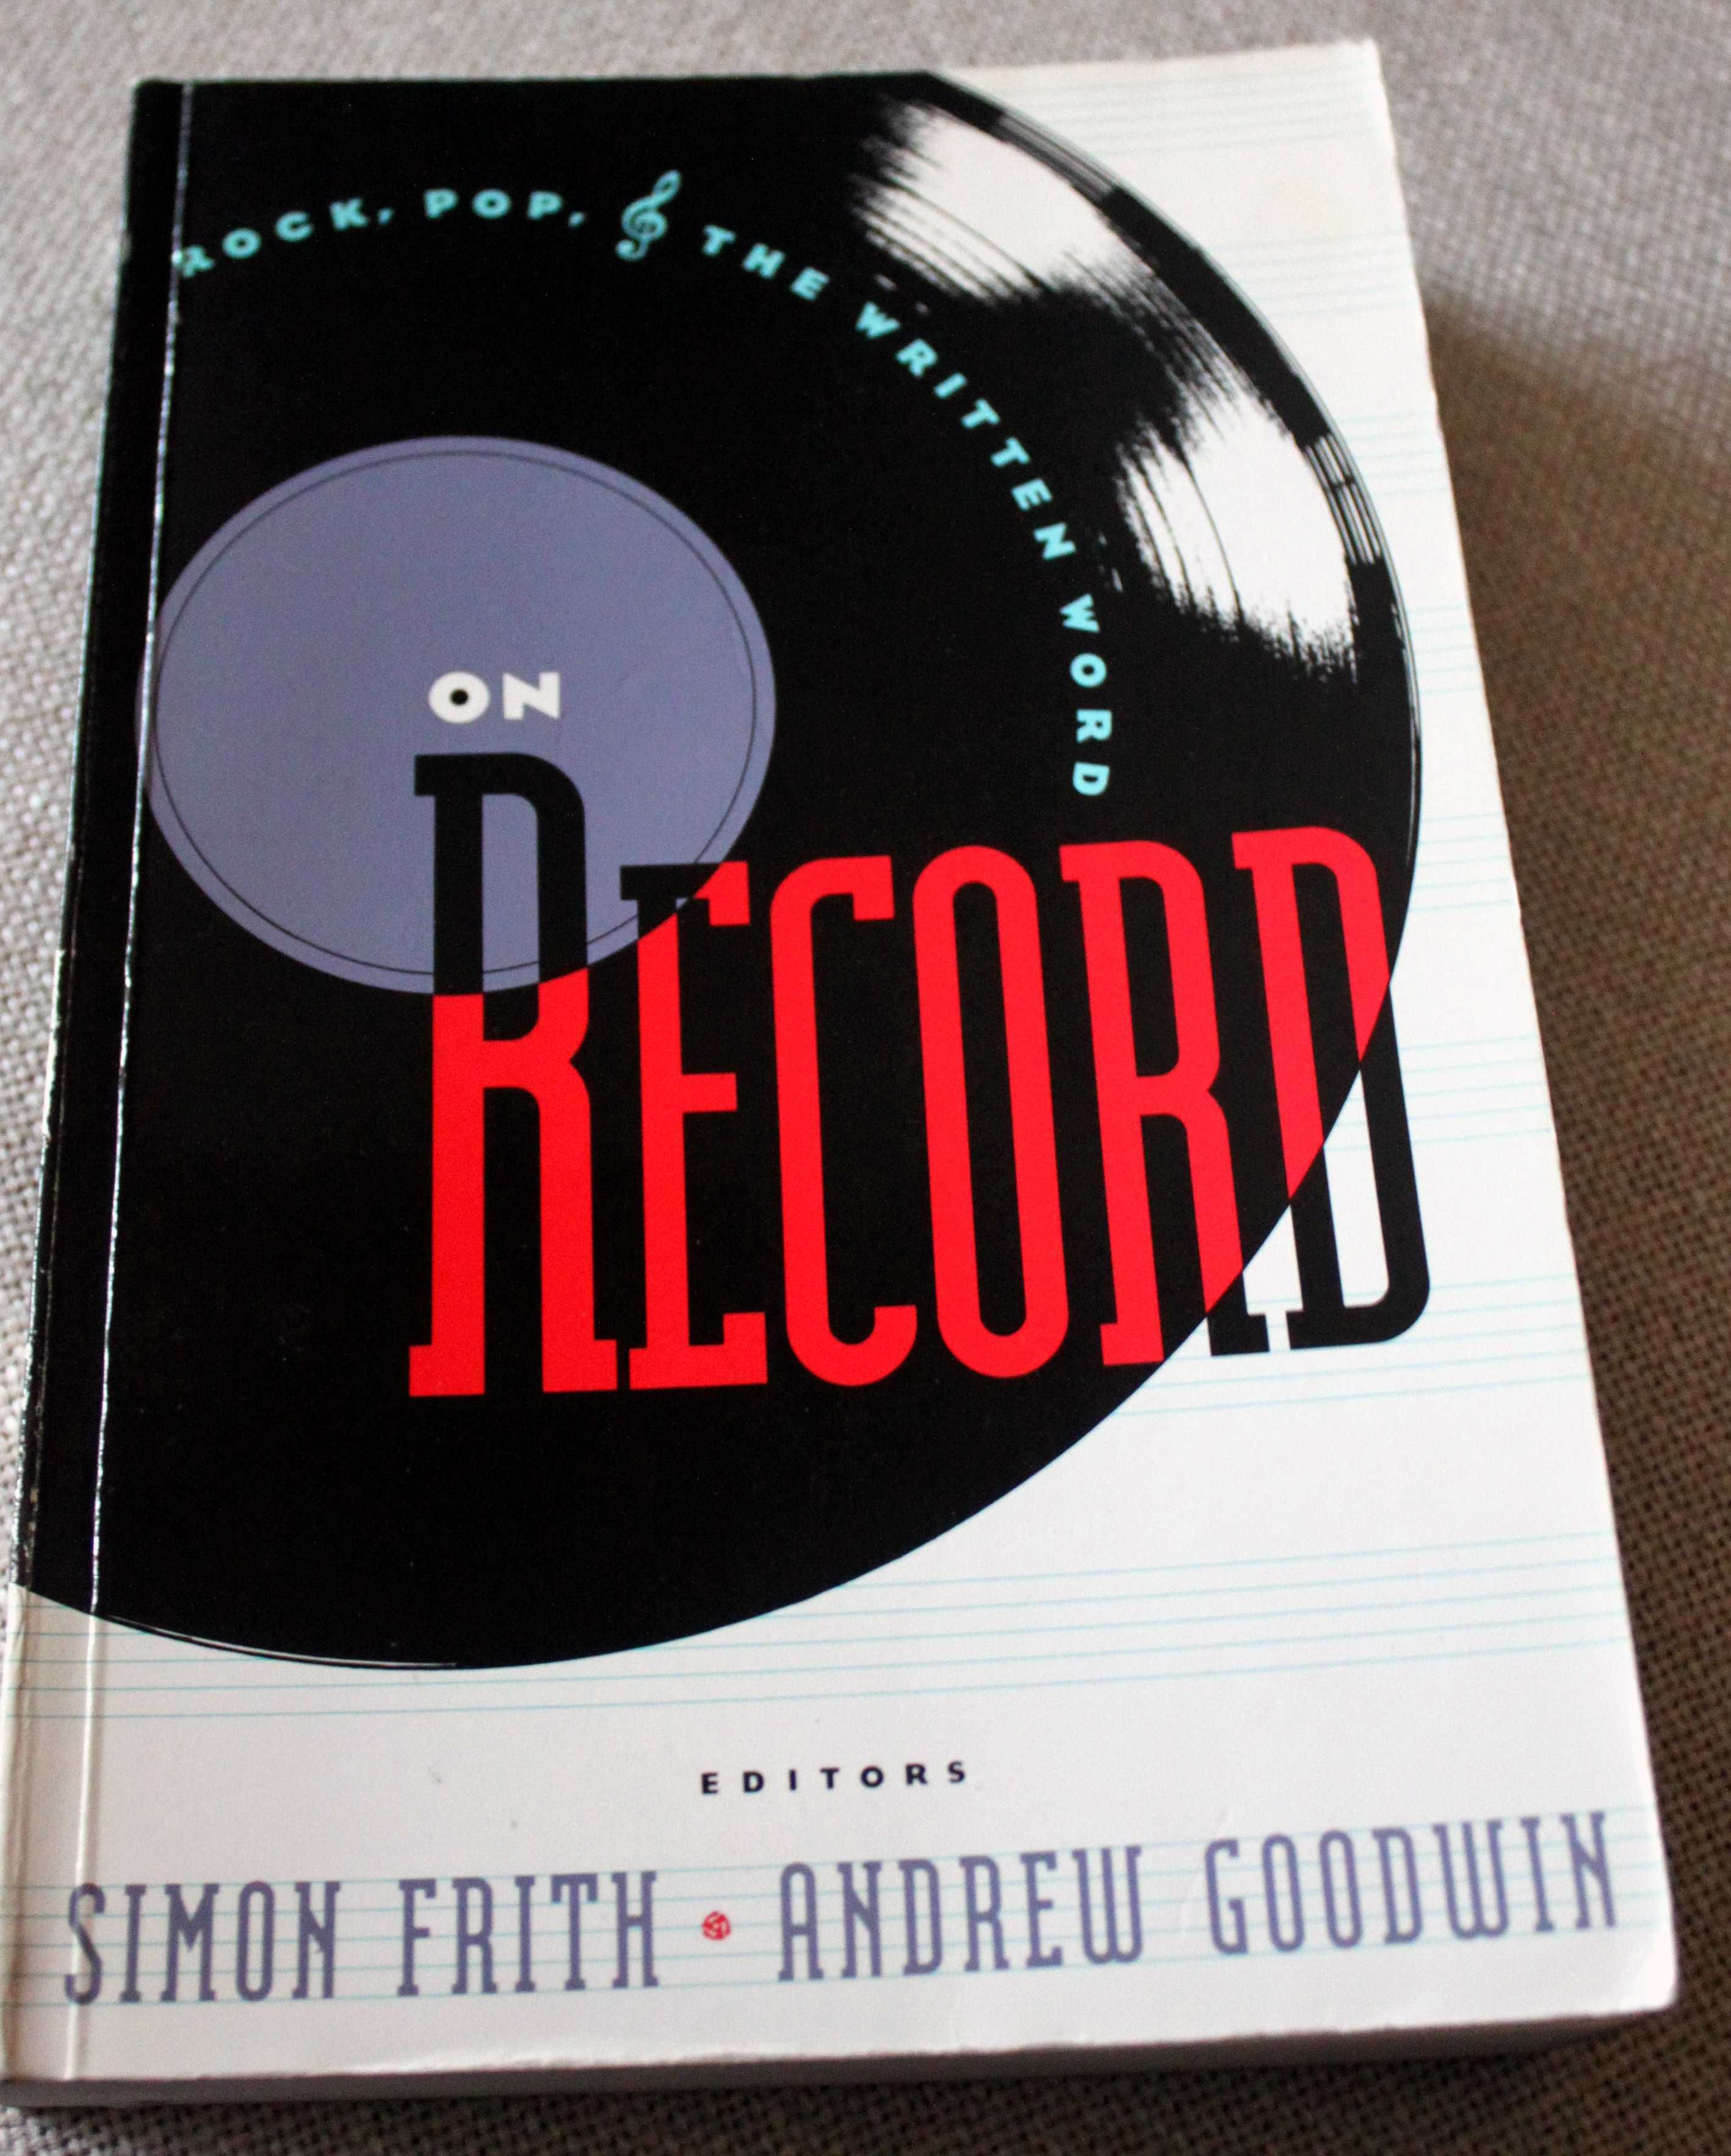 On Record: Rock, Pop and the Written Word - Simon Frith Andrew Goodwin